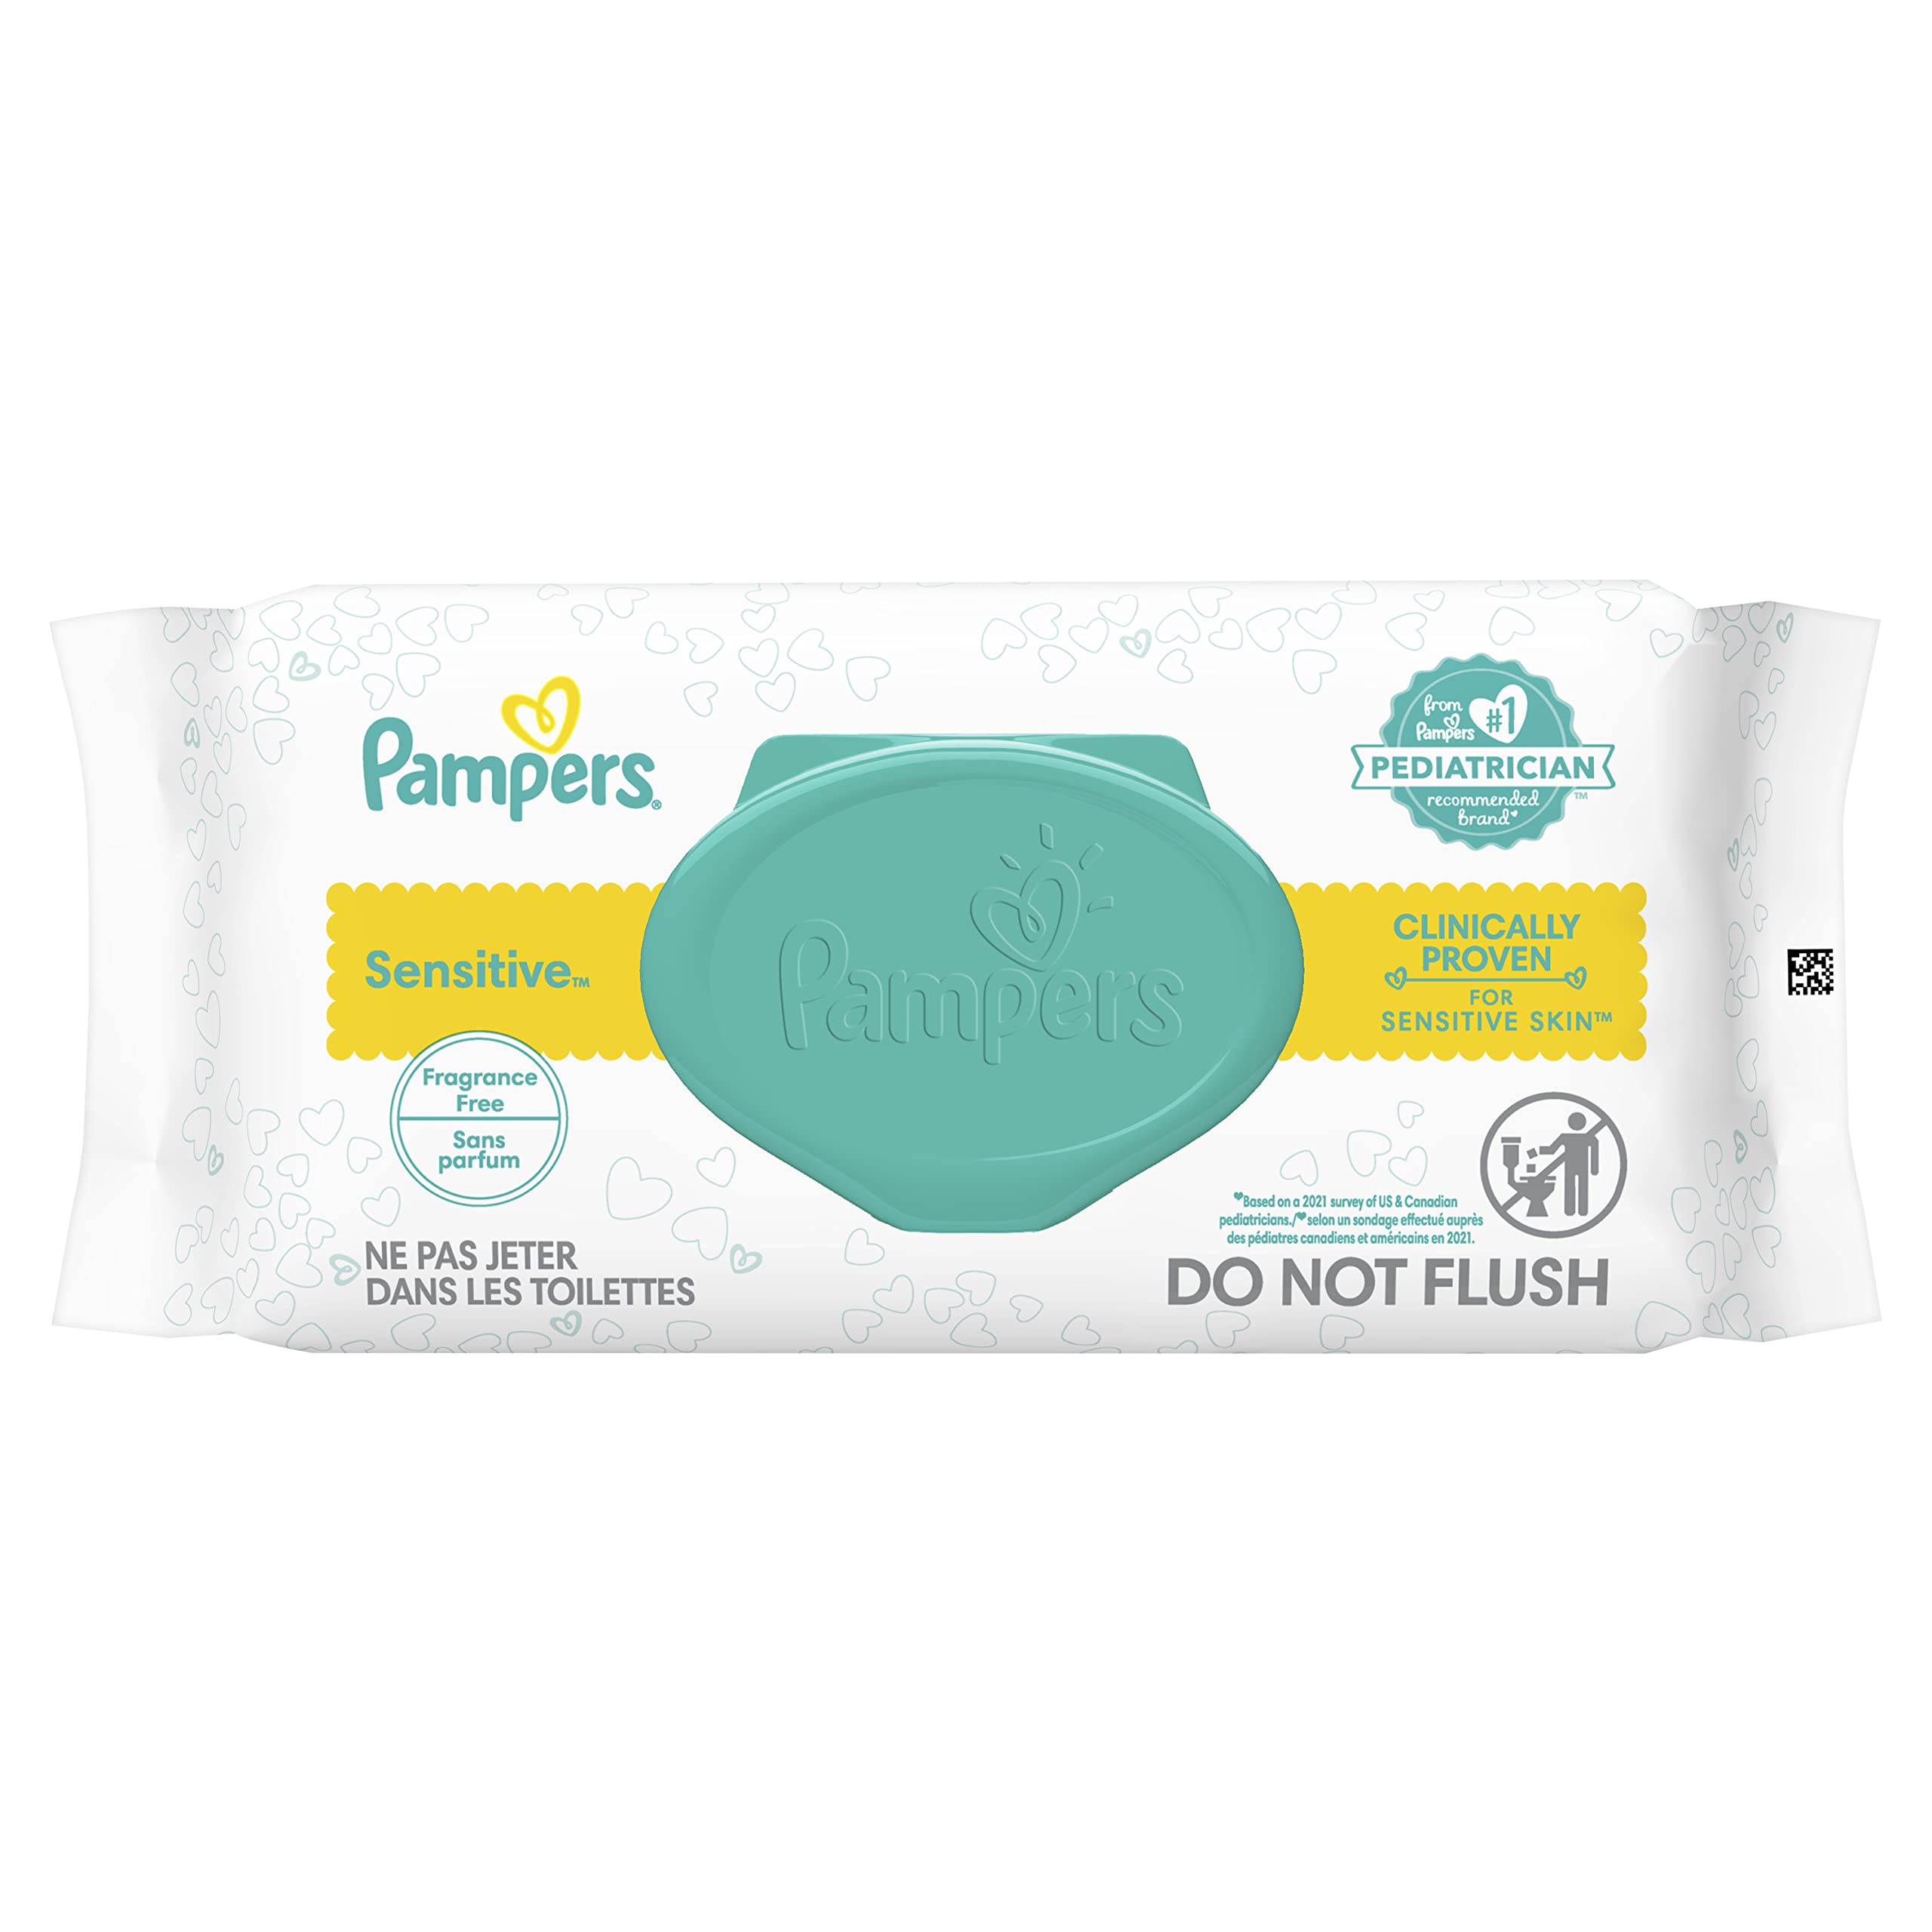 Baby Wipes Fitment, 56 count - Pampers Sensitive Water Based Hypoallergenic and Unscented Baby Wipes (Packaging May Vary)